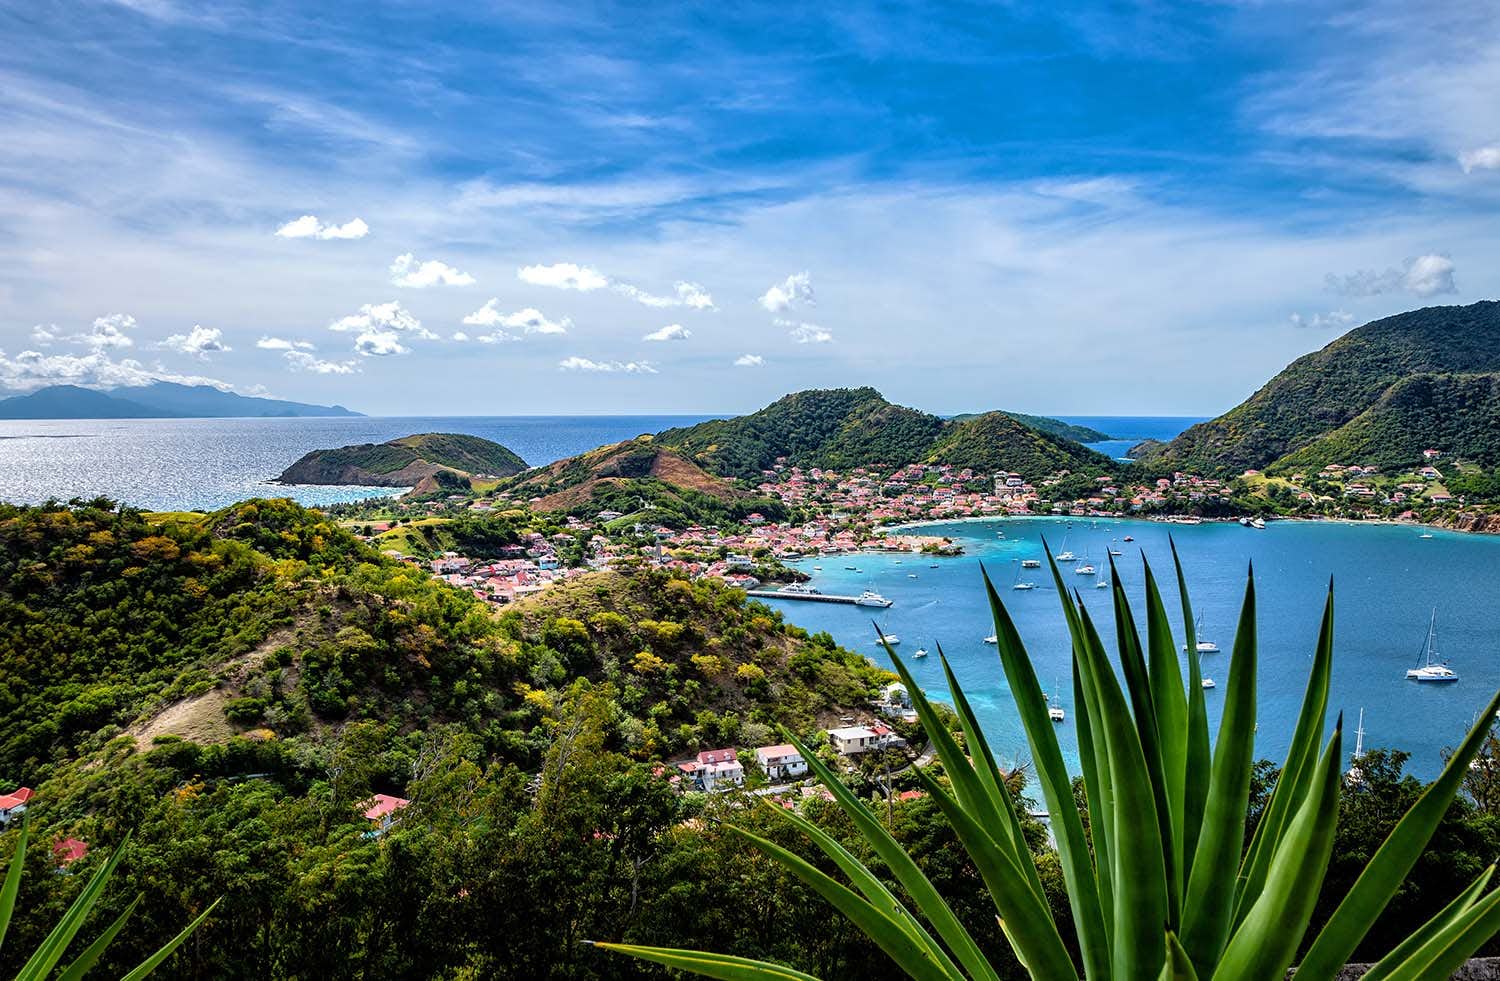 scenic image of Guadeloupe, lush greenery backed by turquoise waters and yachts at anchor, idyllic Caribbean destination